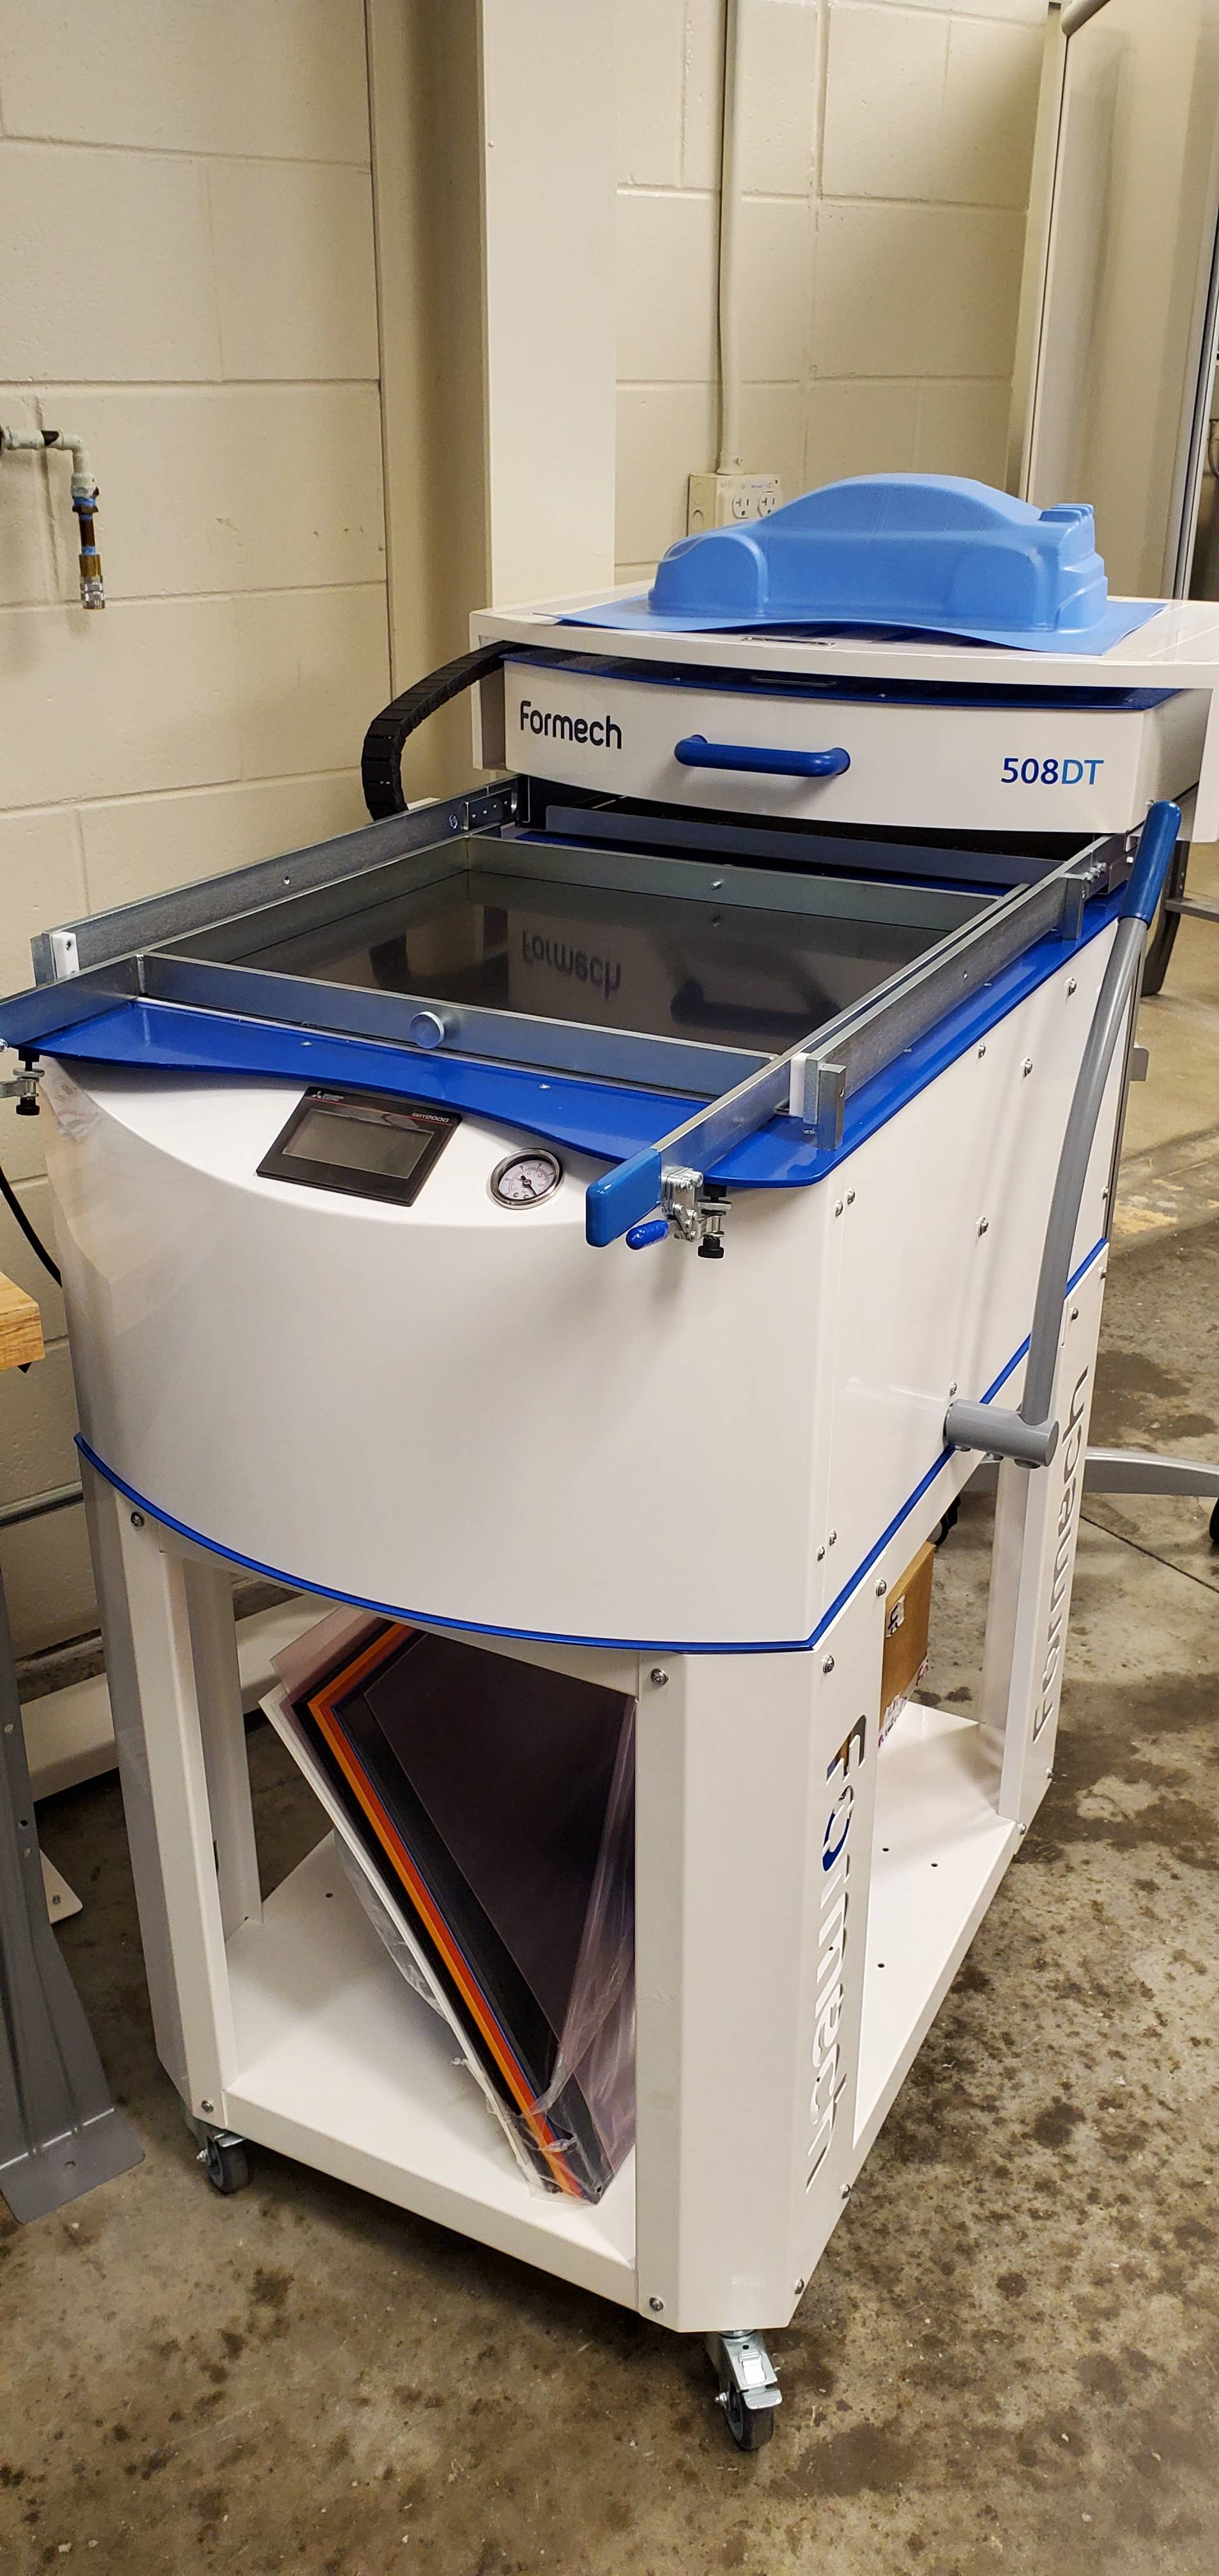 thermoforming machine in the rapid prototyping lab